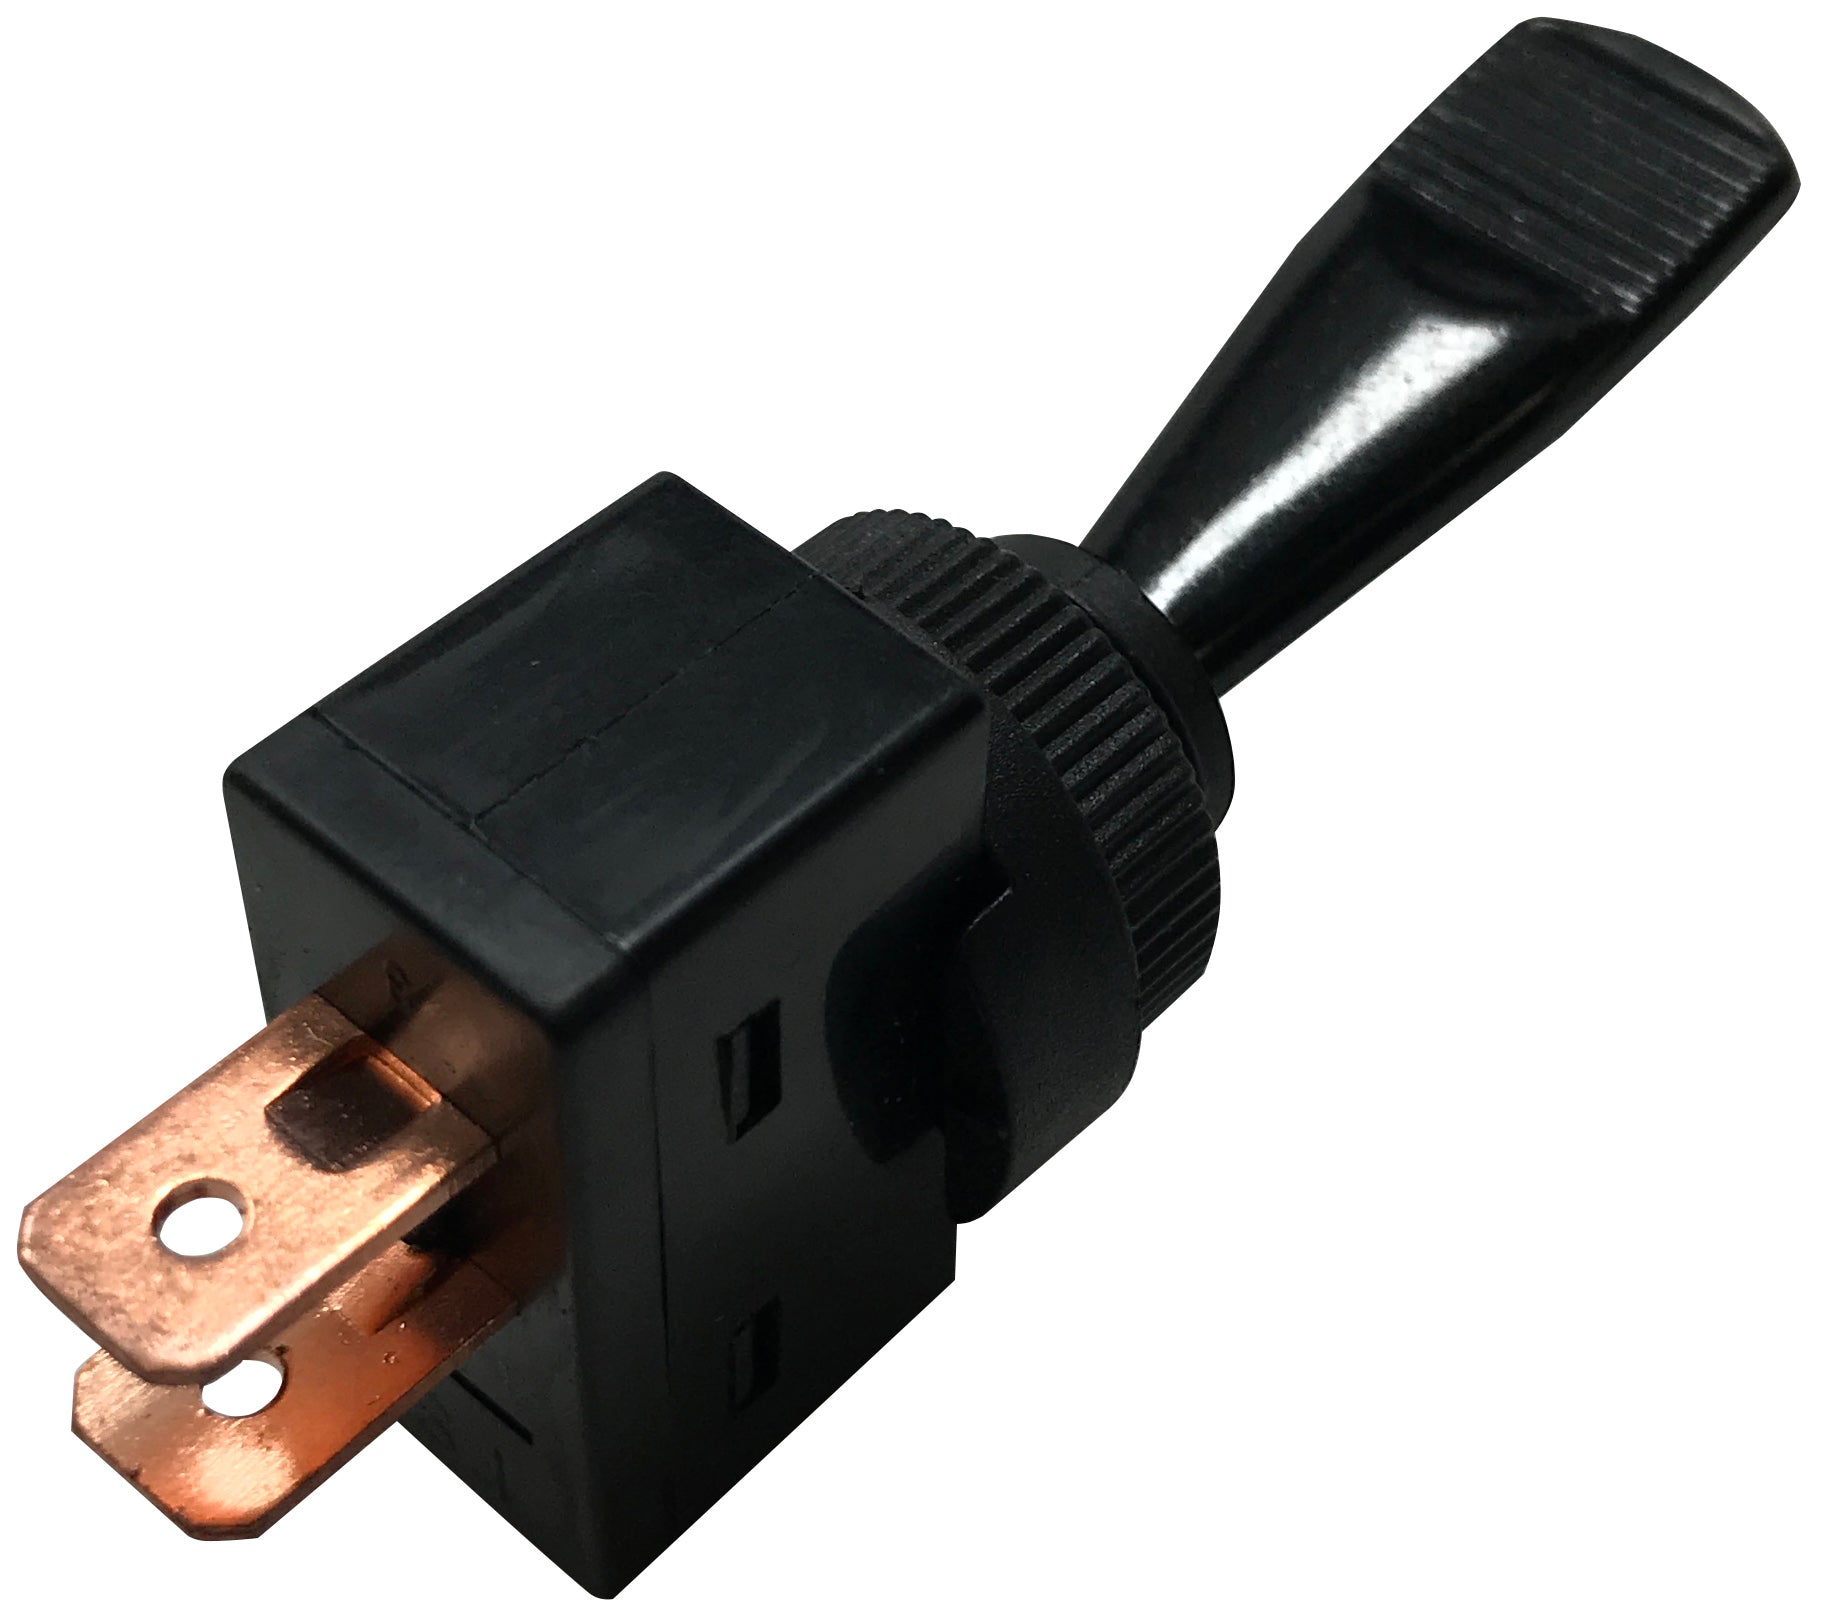 Universal Black Plastic MOMENTARY ON / Normal OFF Toggle Switch - 12 Volt @ 10 Amps